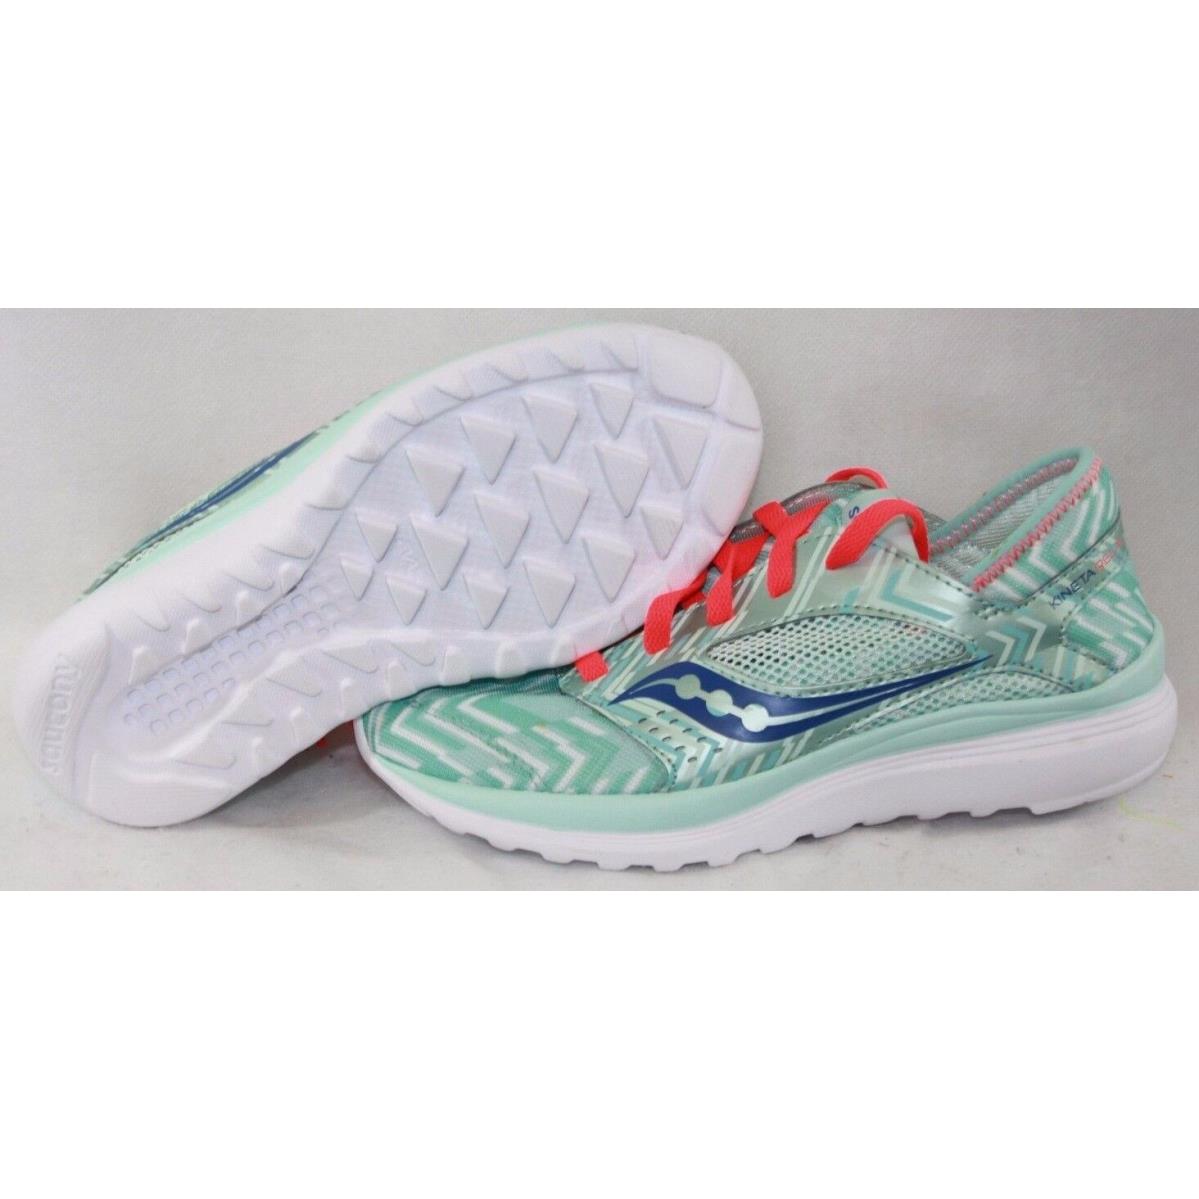 Womens Saucony Kineta Relay S15244-12 Mint Green Blue White Sneakers Shoes